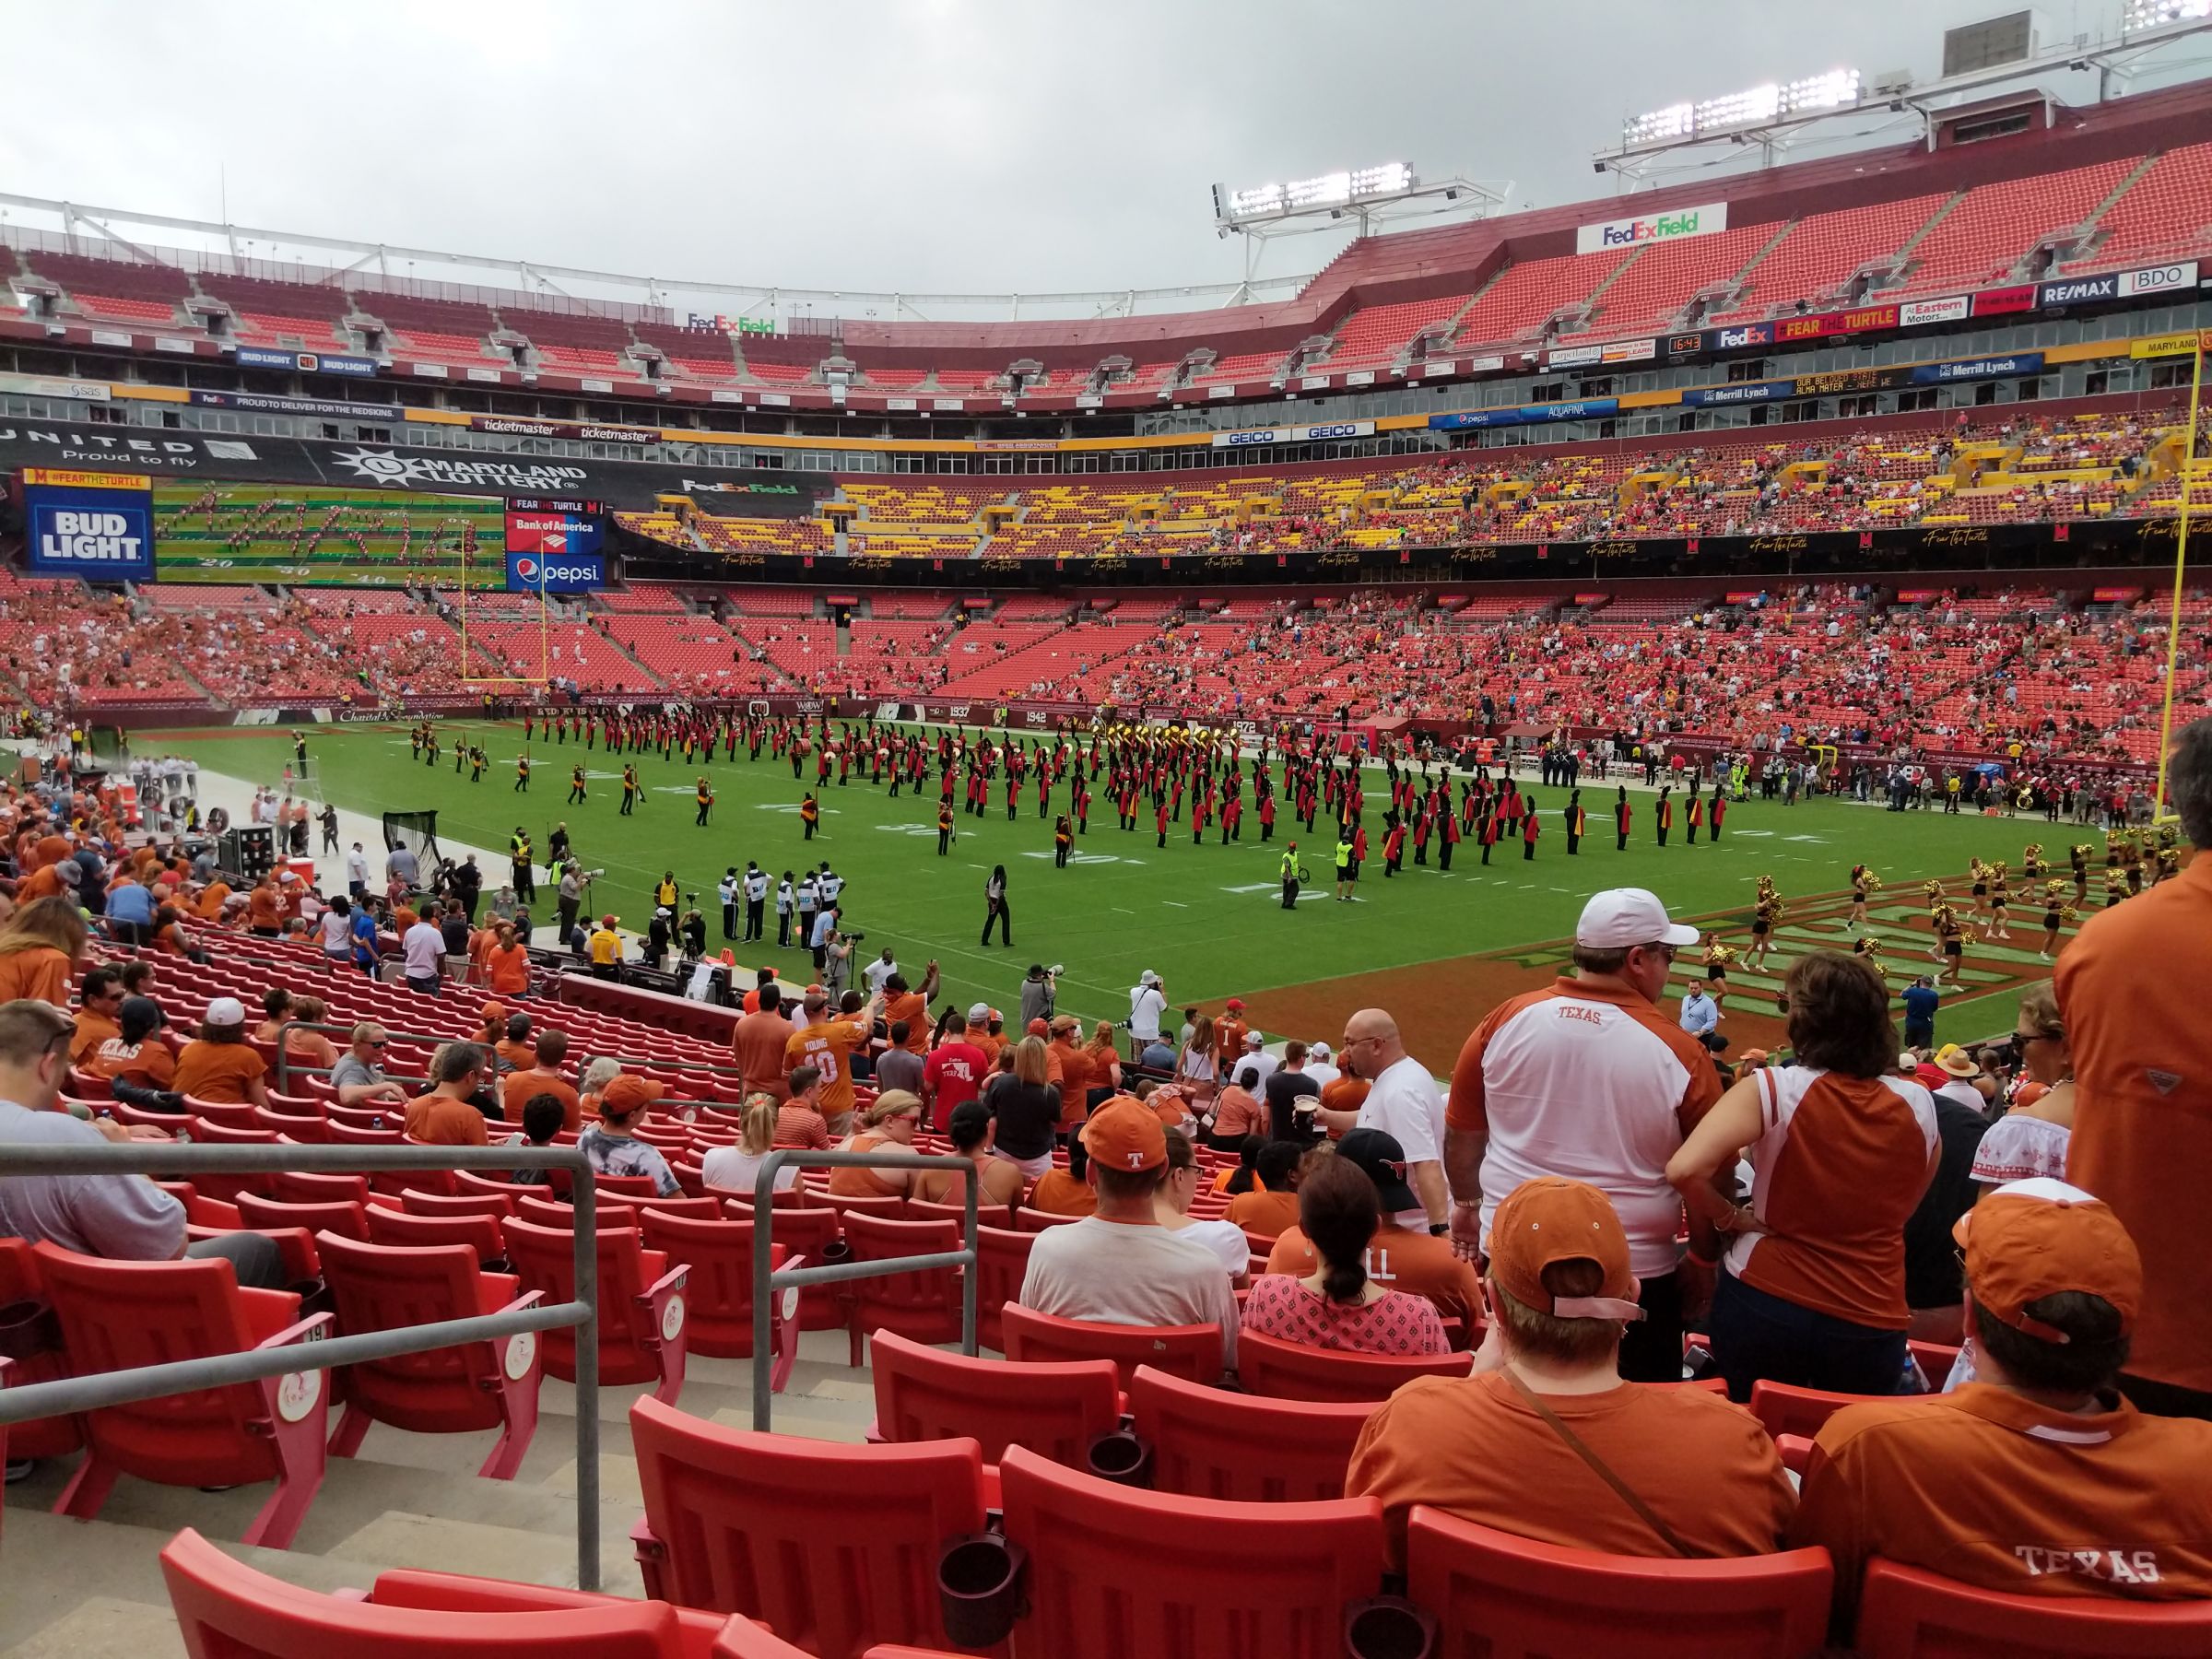 section 115, row 23 seat view  - fedexfield